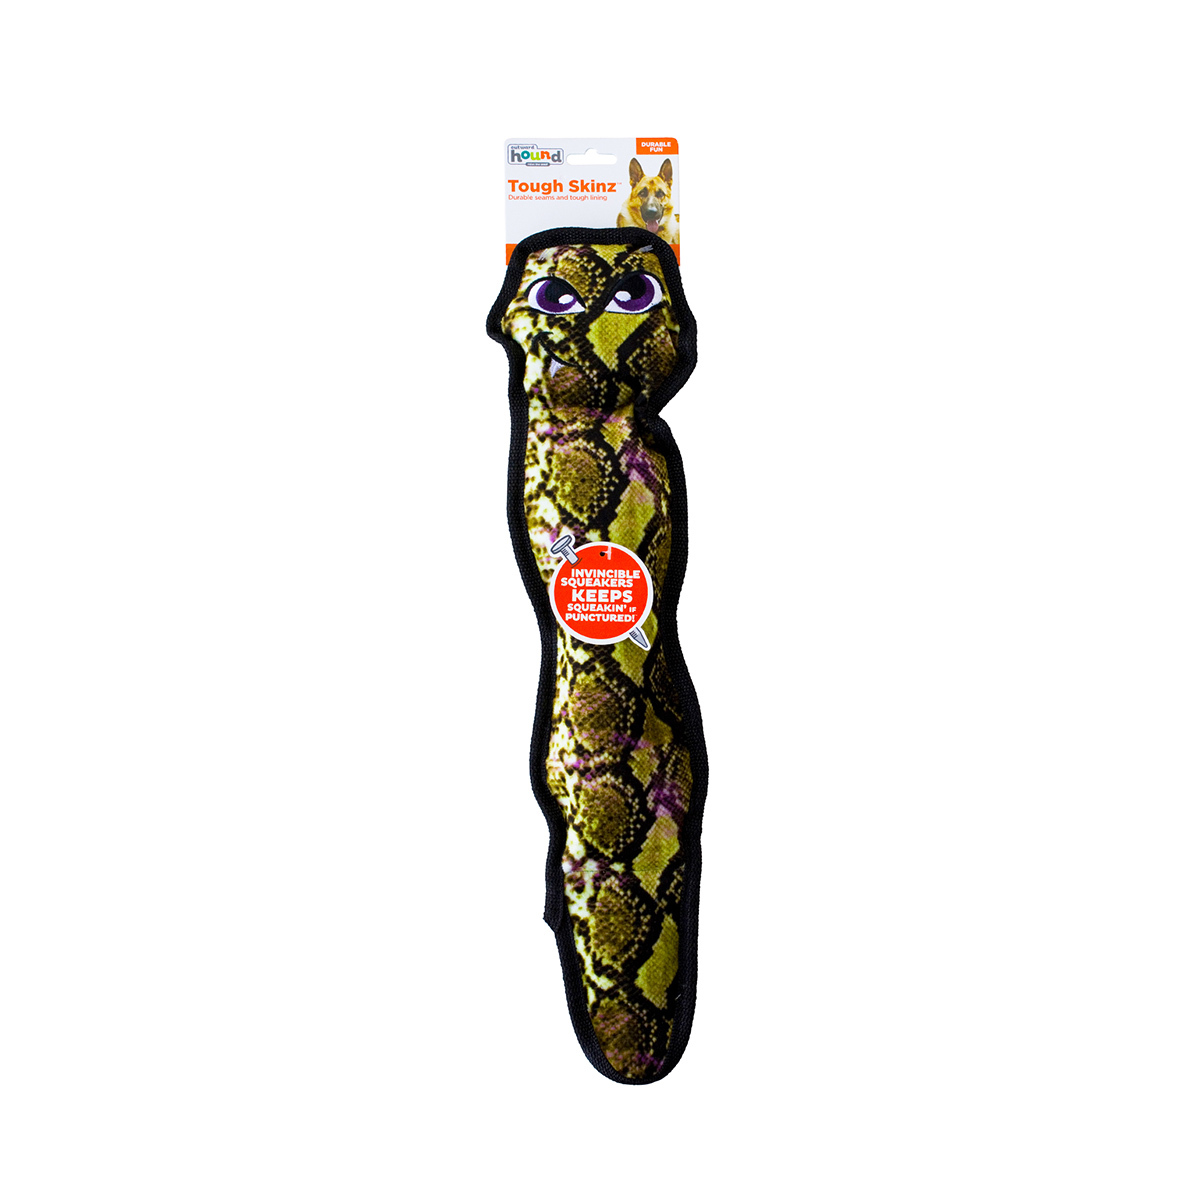 Outward Hound Invincible Tough Skinz Rattle Snake Dog Toy - Green - Large image 0